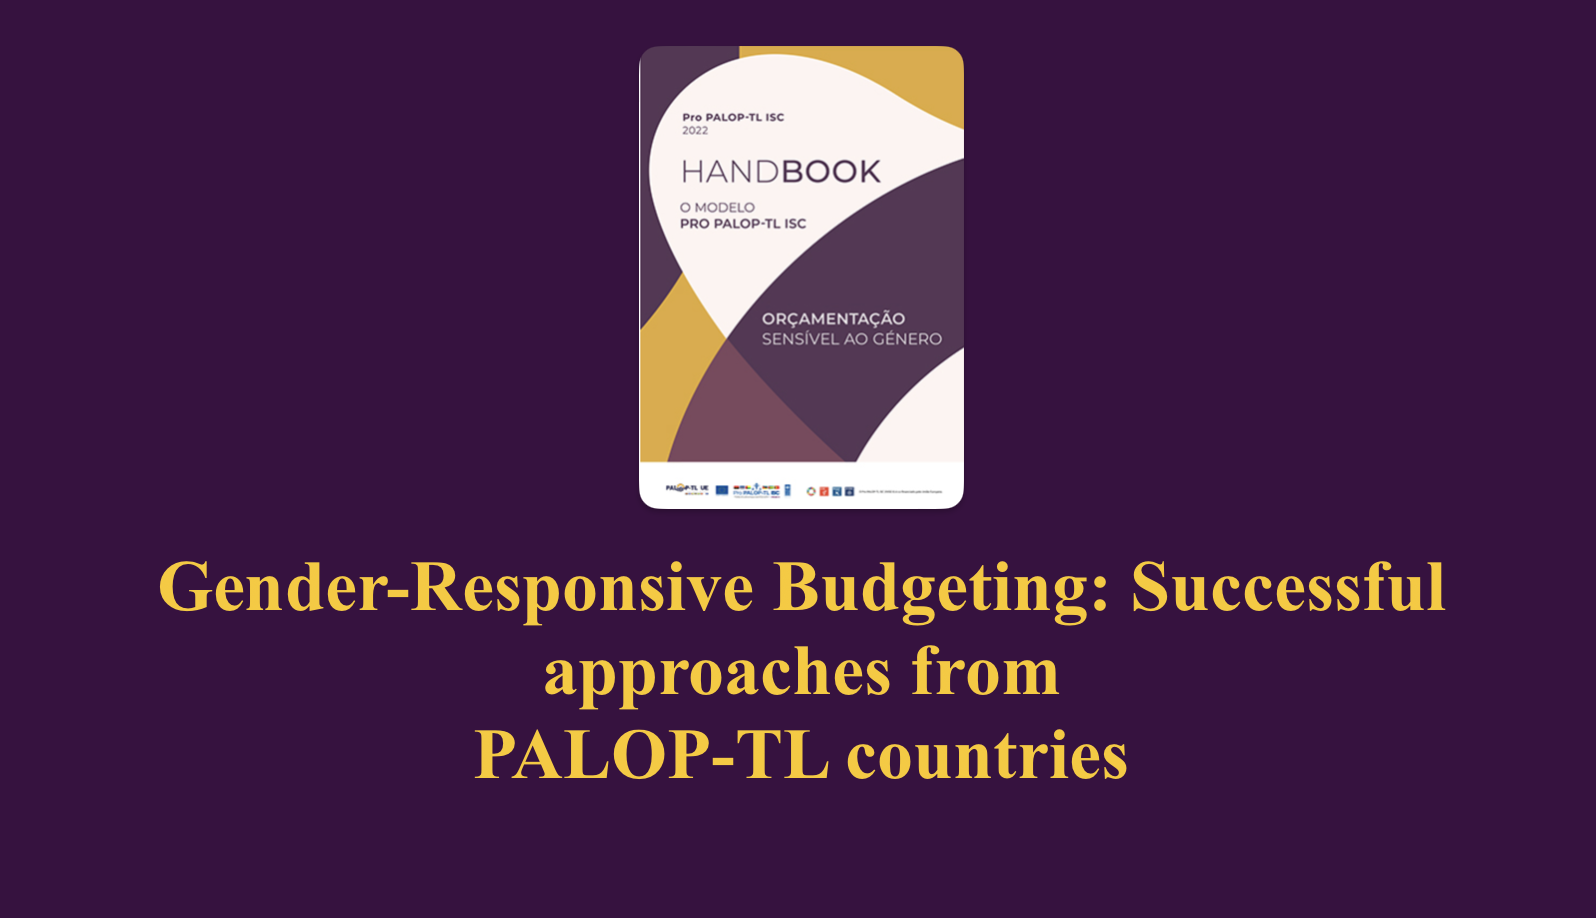 Gender-Responsive Budgeting: Successful approaches from PALOP-TL countries